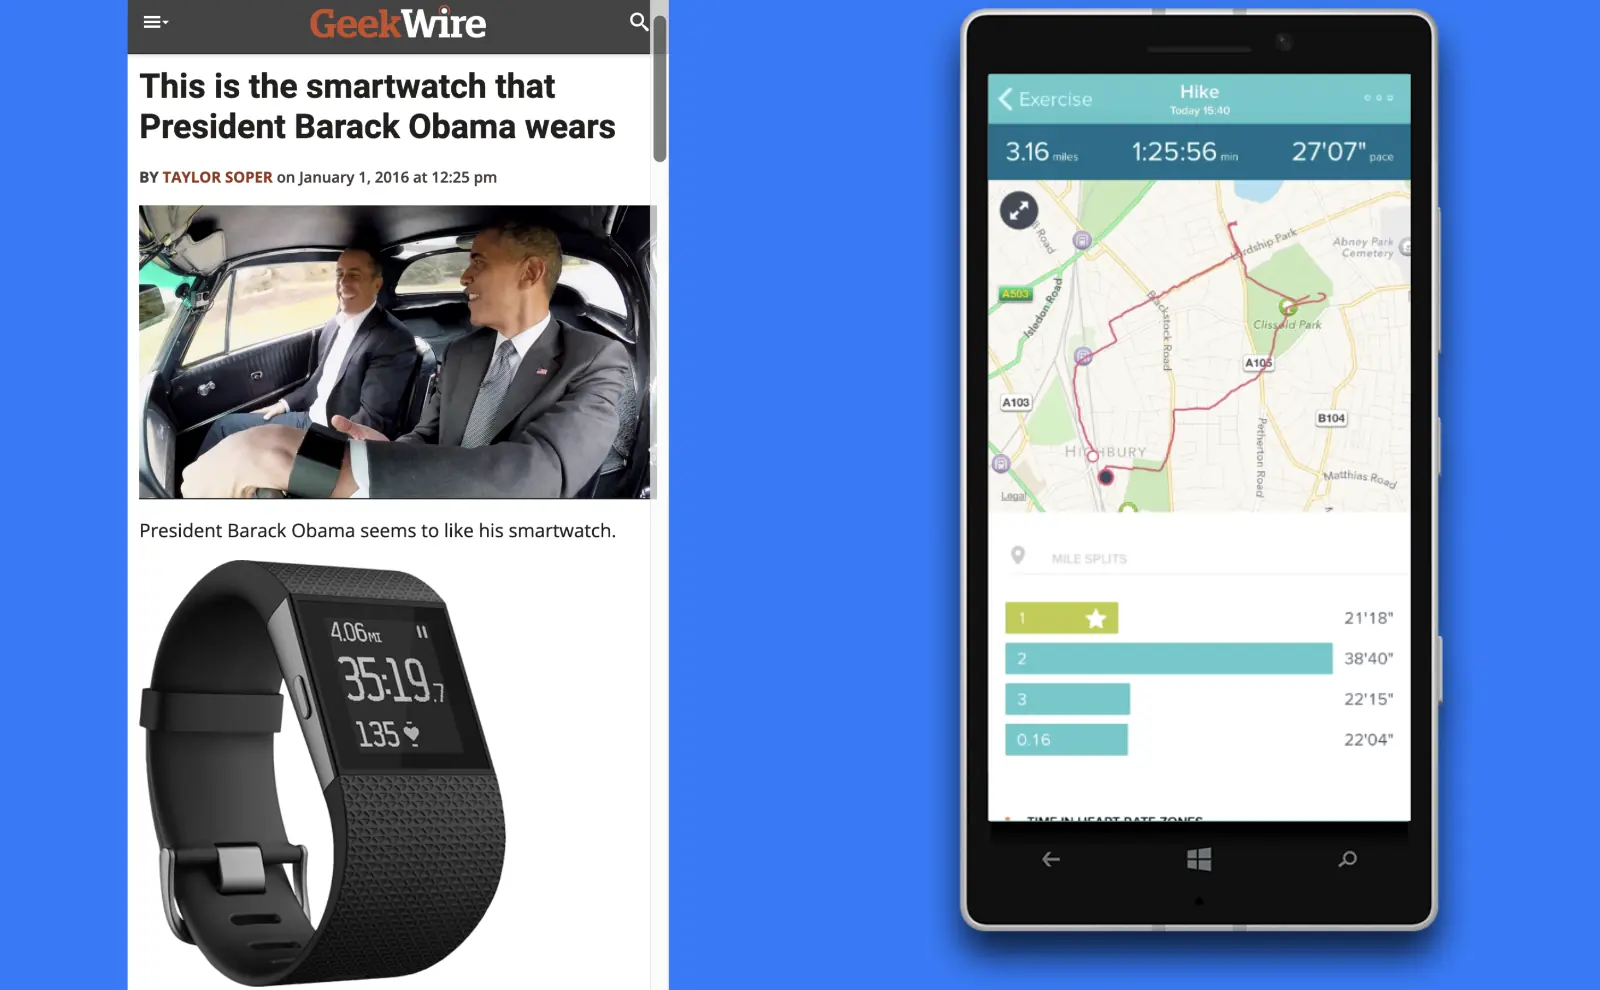 President Obama wearing a Fitbit Surge. Fitbit app showing a hike workout summary on a Windows Phone